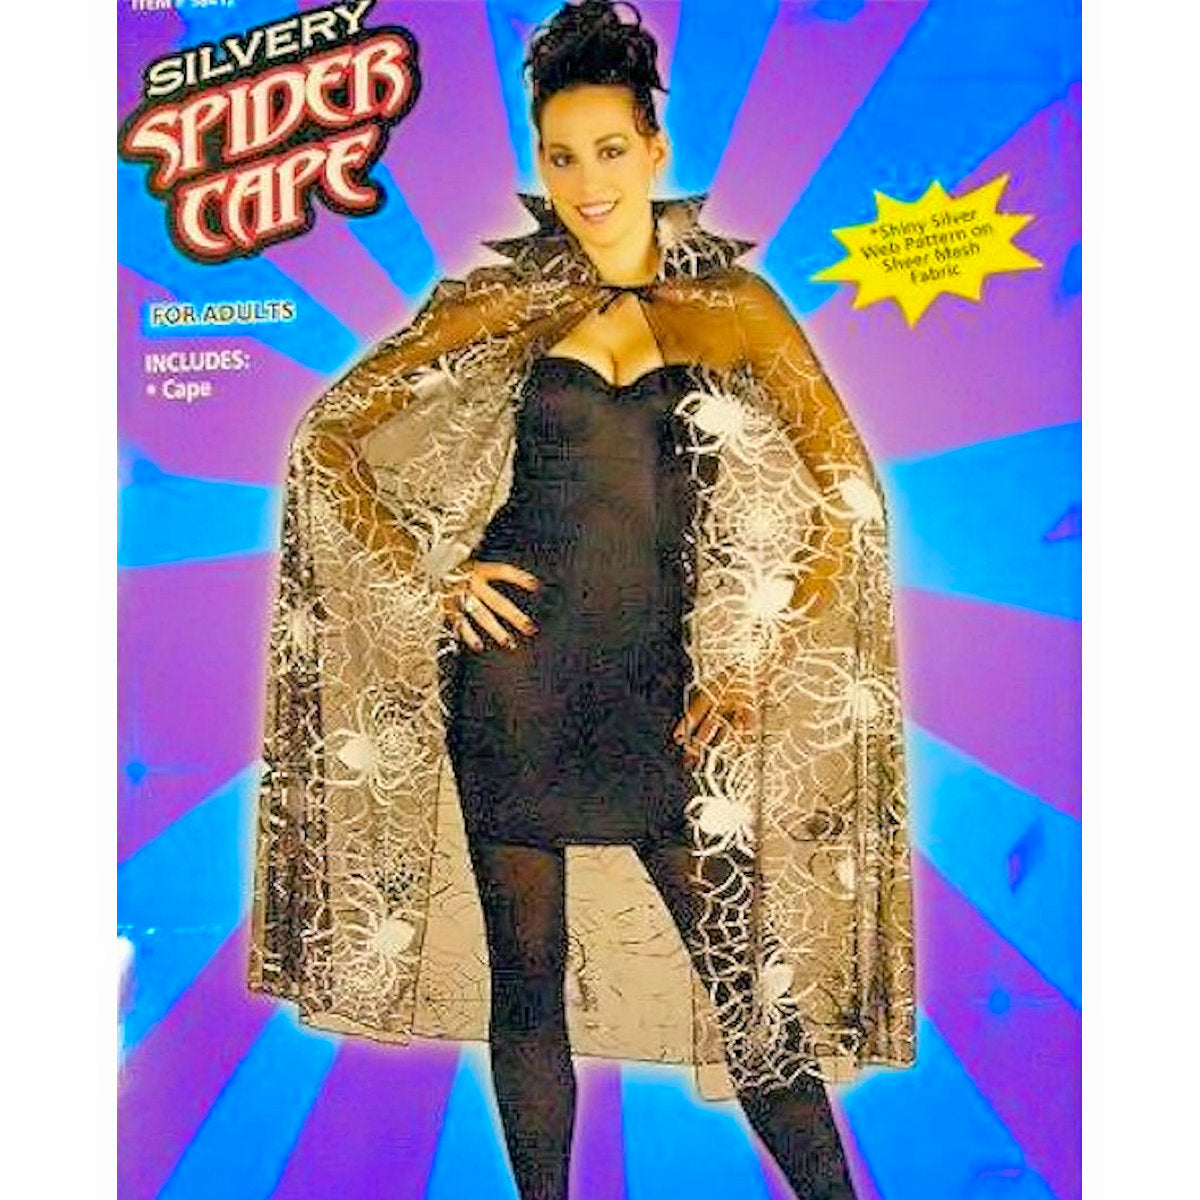 CAPE Sheer with Shiny Silvery Spider Web Pattern Adult